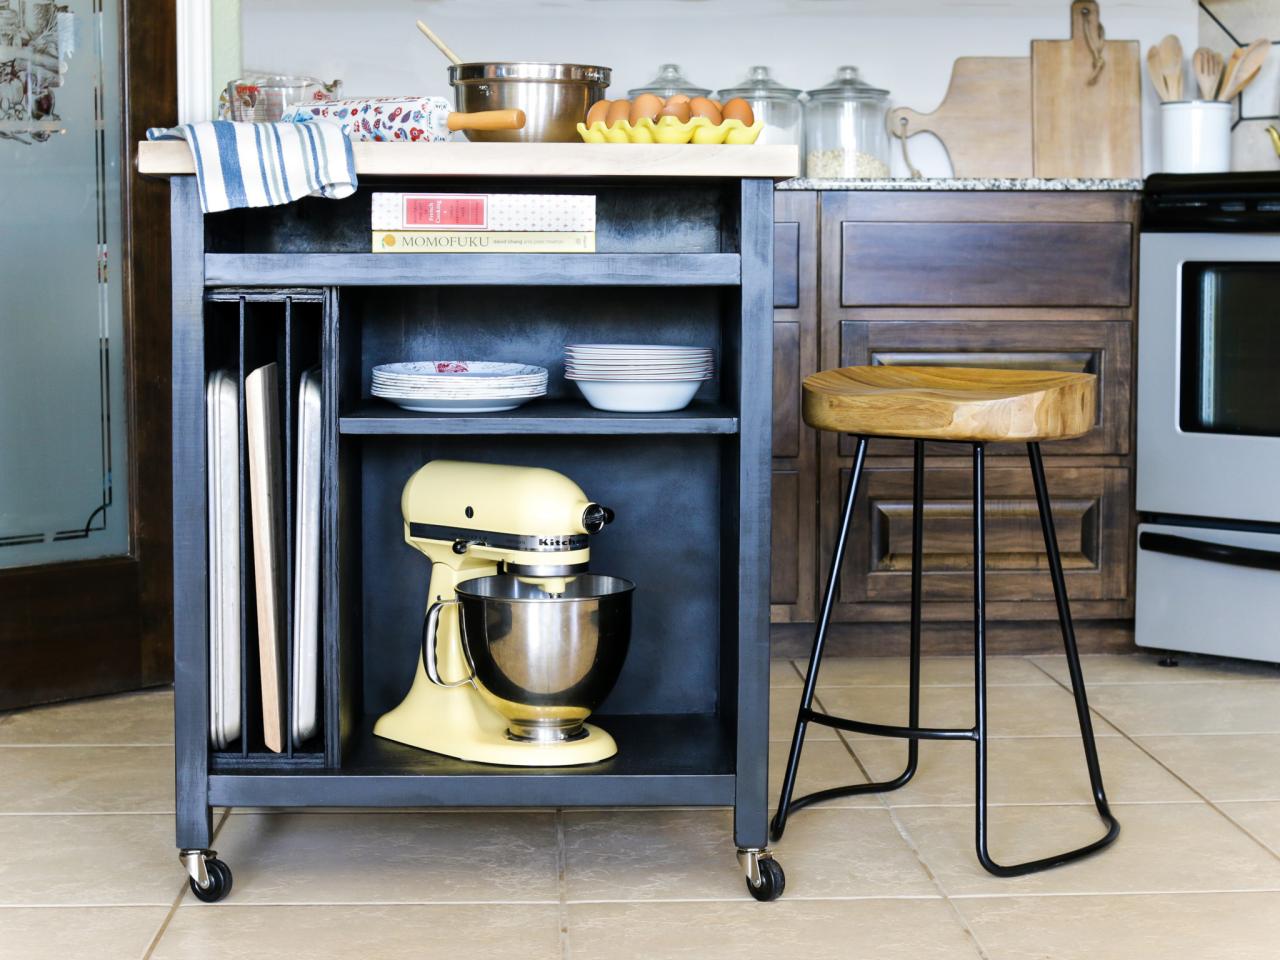 Build A Diy Kitchen Island On Wheels, Mobile Kitchen Cabinets On Wheels